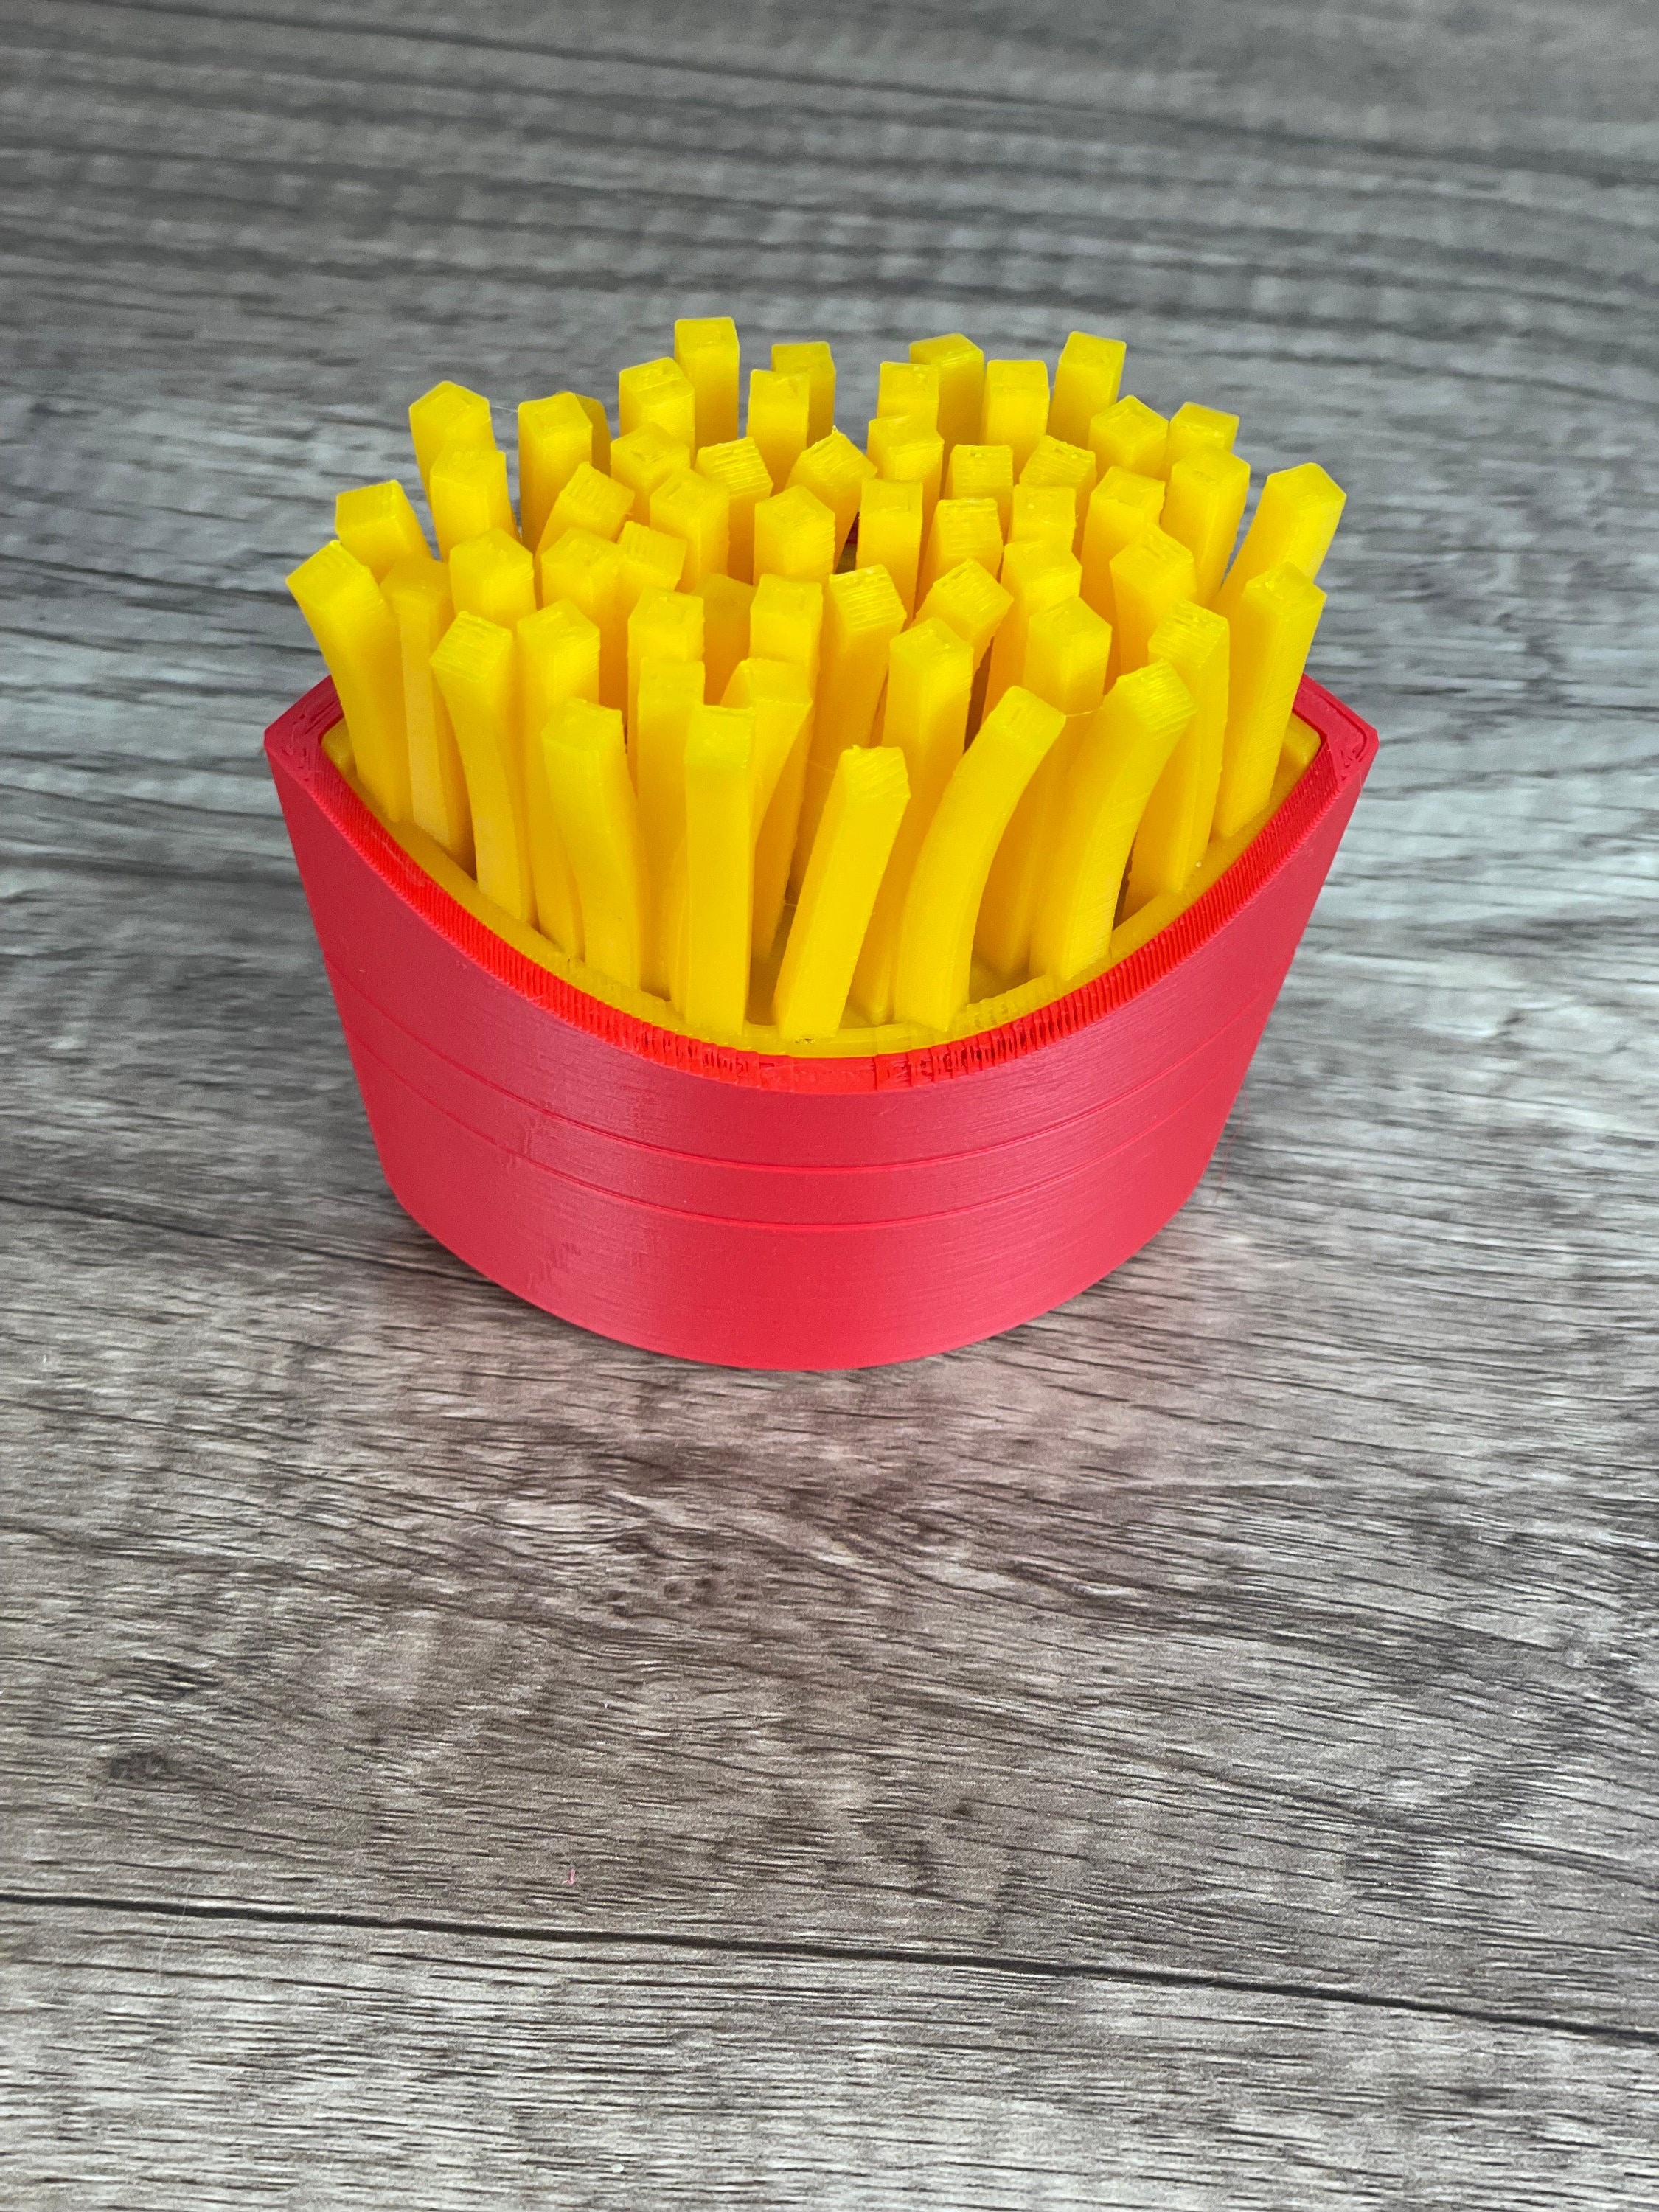 XZJMY 60 Pack 5oz French Fry Containers,Disposable Paperboard French Fries  Containers,French Fries Holders, Small Kraft Paper Takeout Boxes for